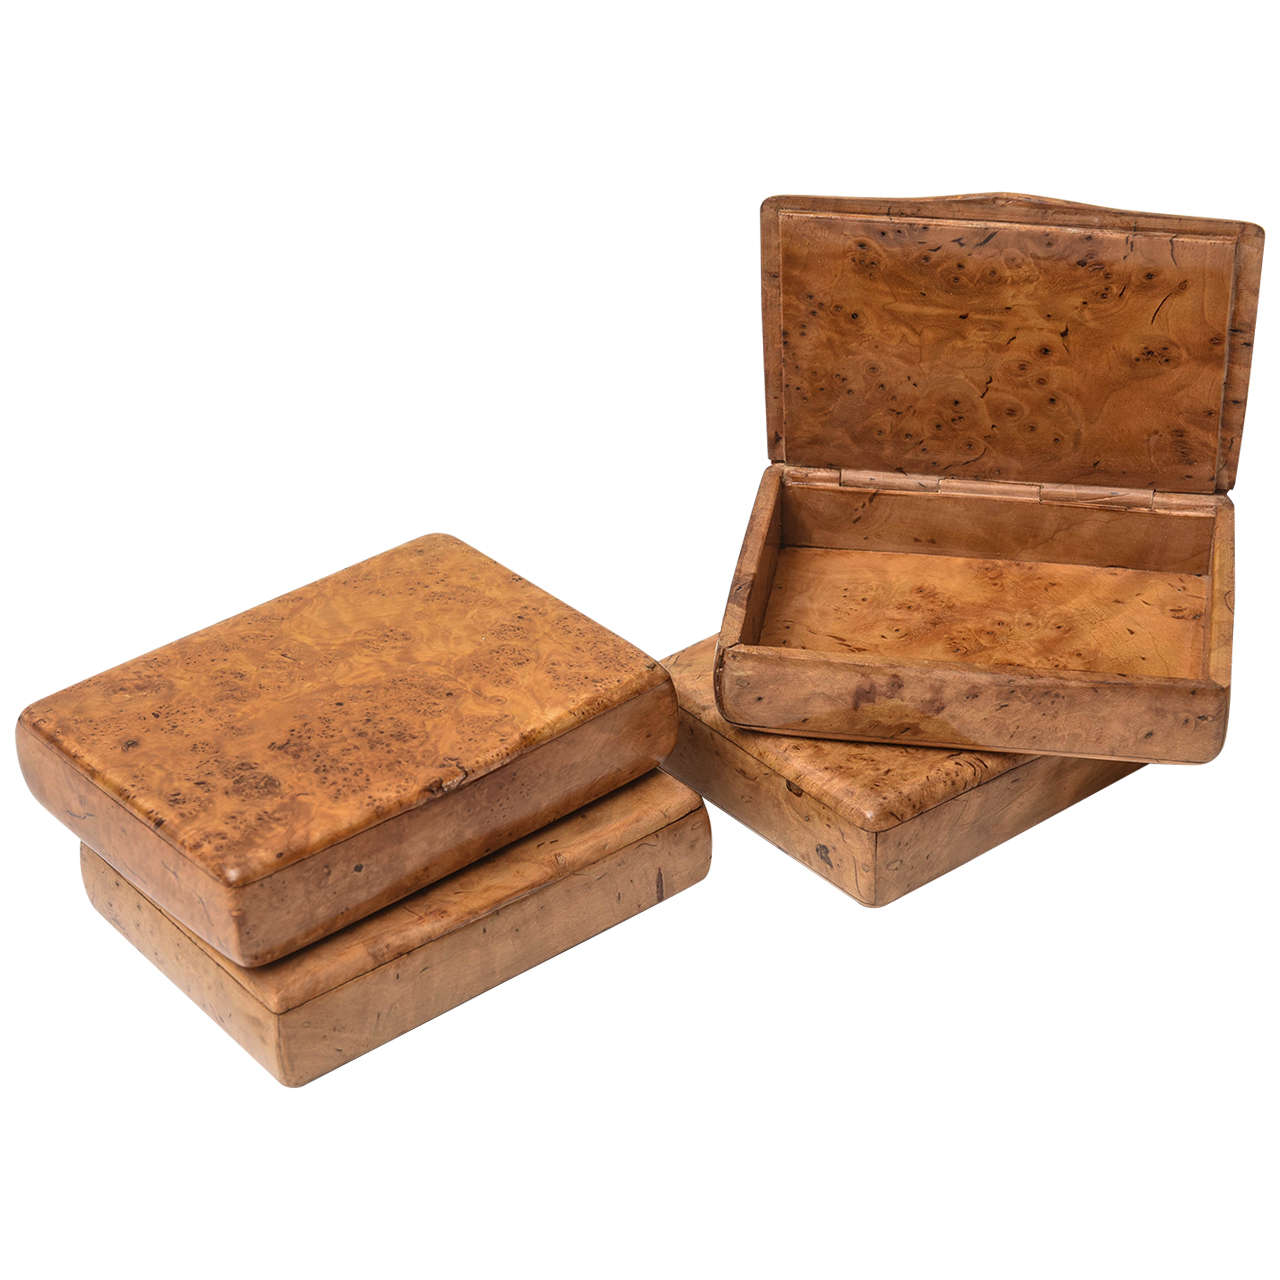 Amboyna Wood Cigarette Cases Set Made in Russia